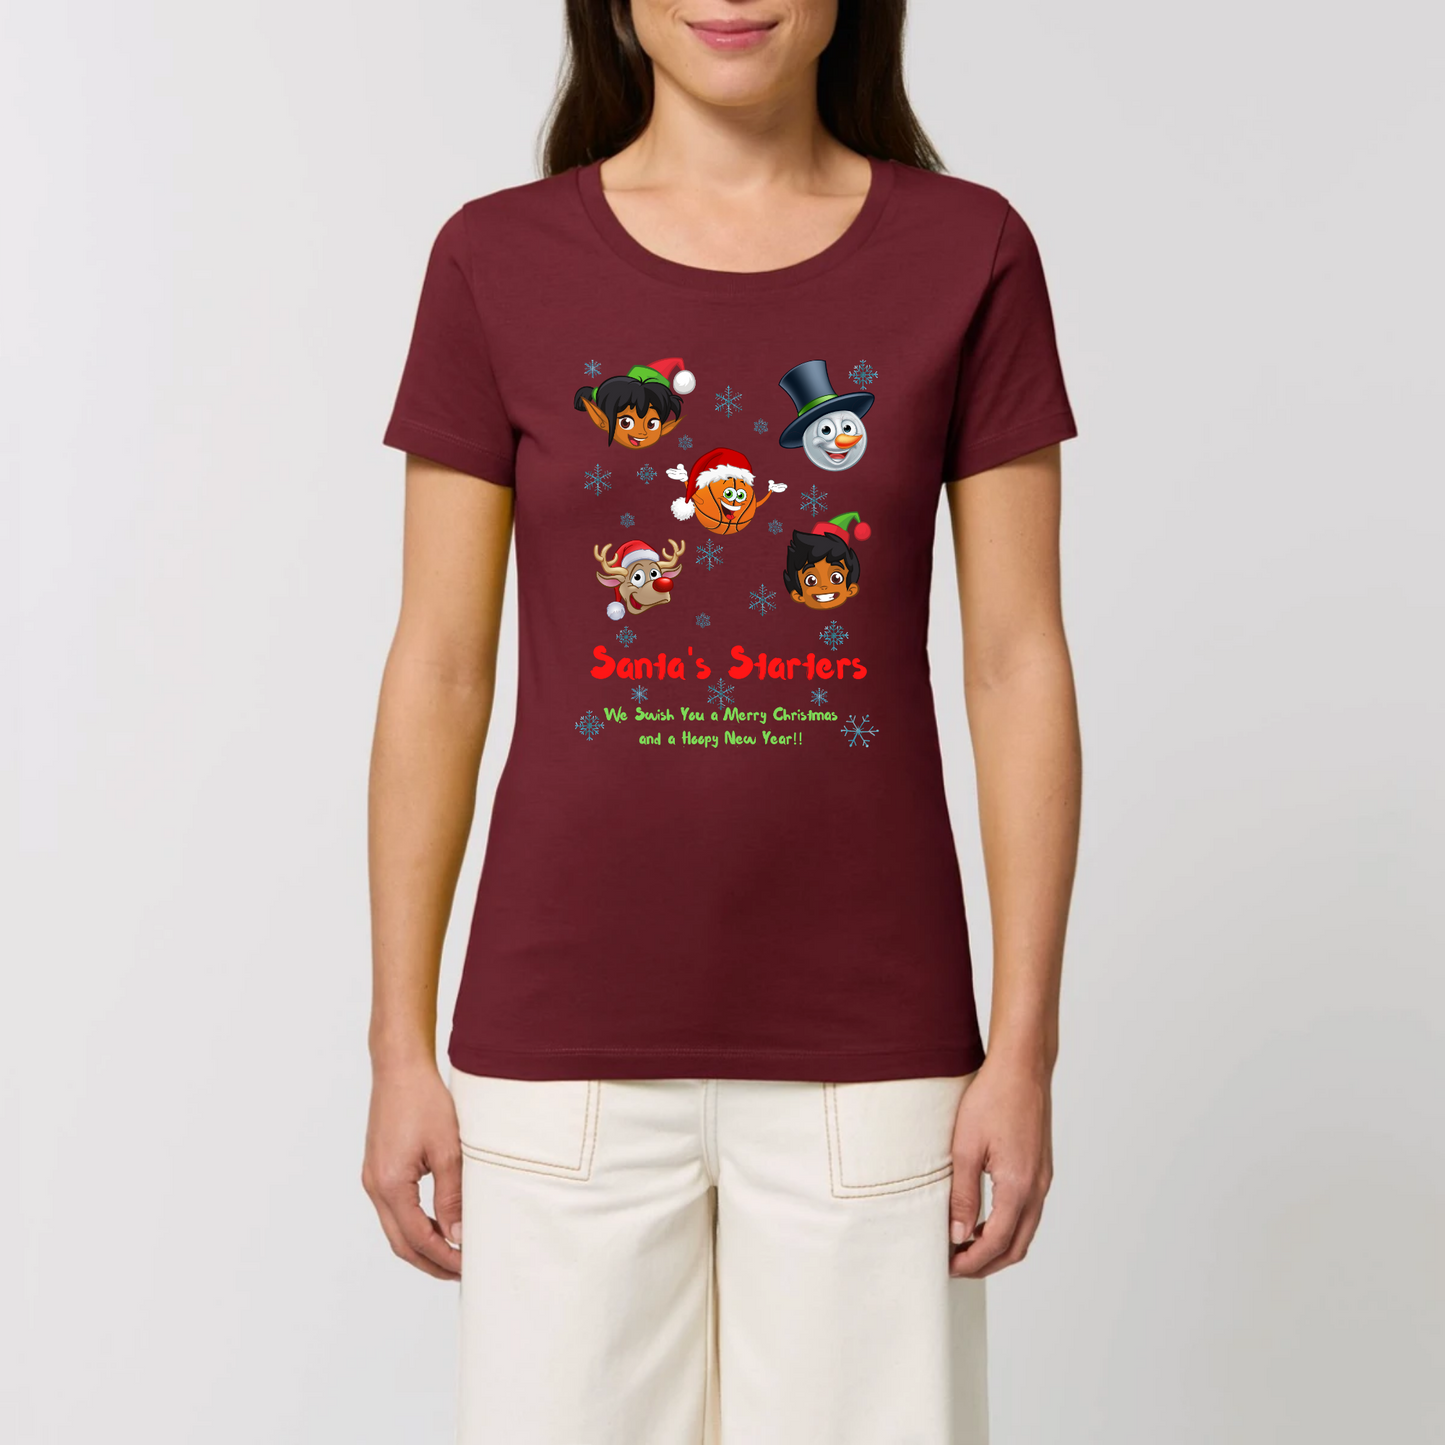 Model wearing a christmas t-shirt with a print design on front, The design has 5 cartoon character heads of 2 elves, a snowman, rundolf and a Basketball face with the heading Santa's starters and sub heading og We swish you a merry Christmas and a hoopy New Year. The t-shirt is Maroon